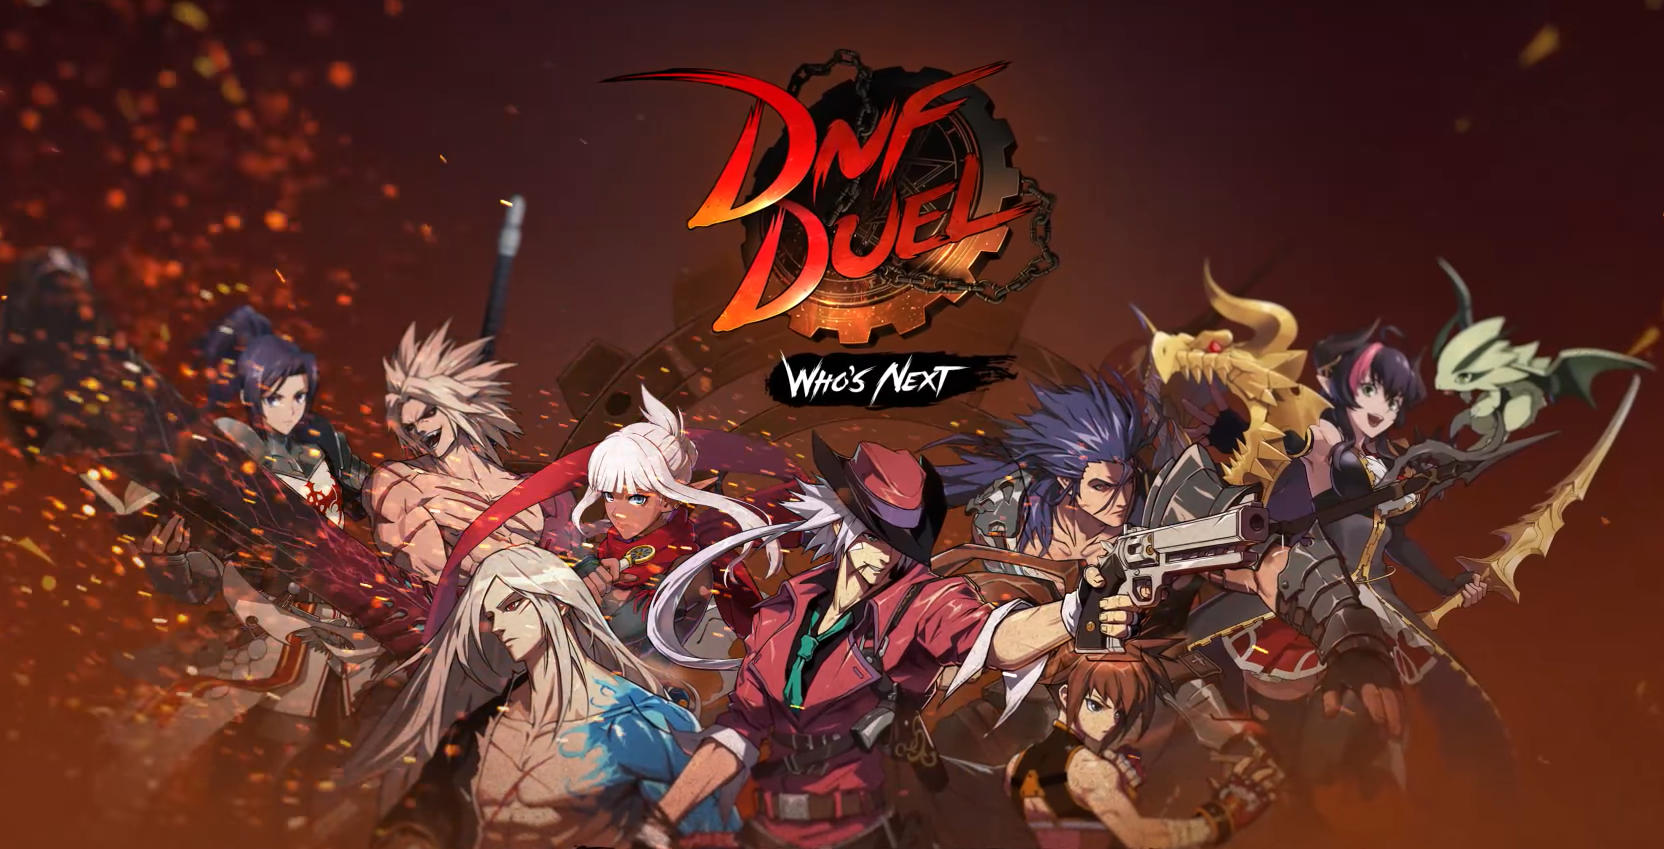 download dnf duel free for free